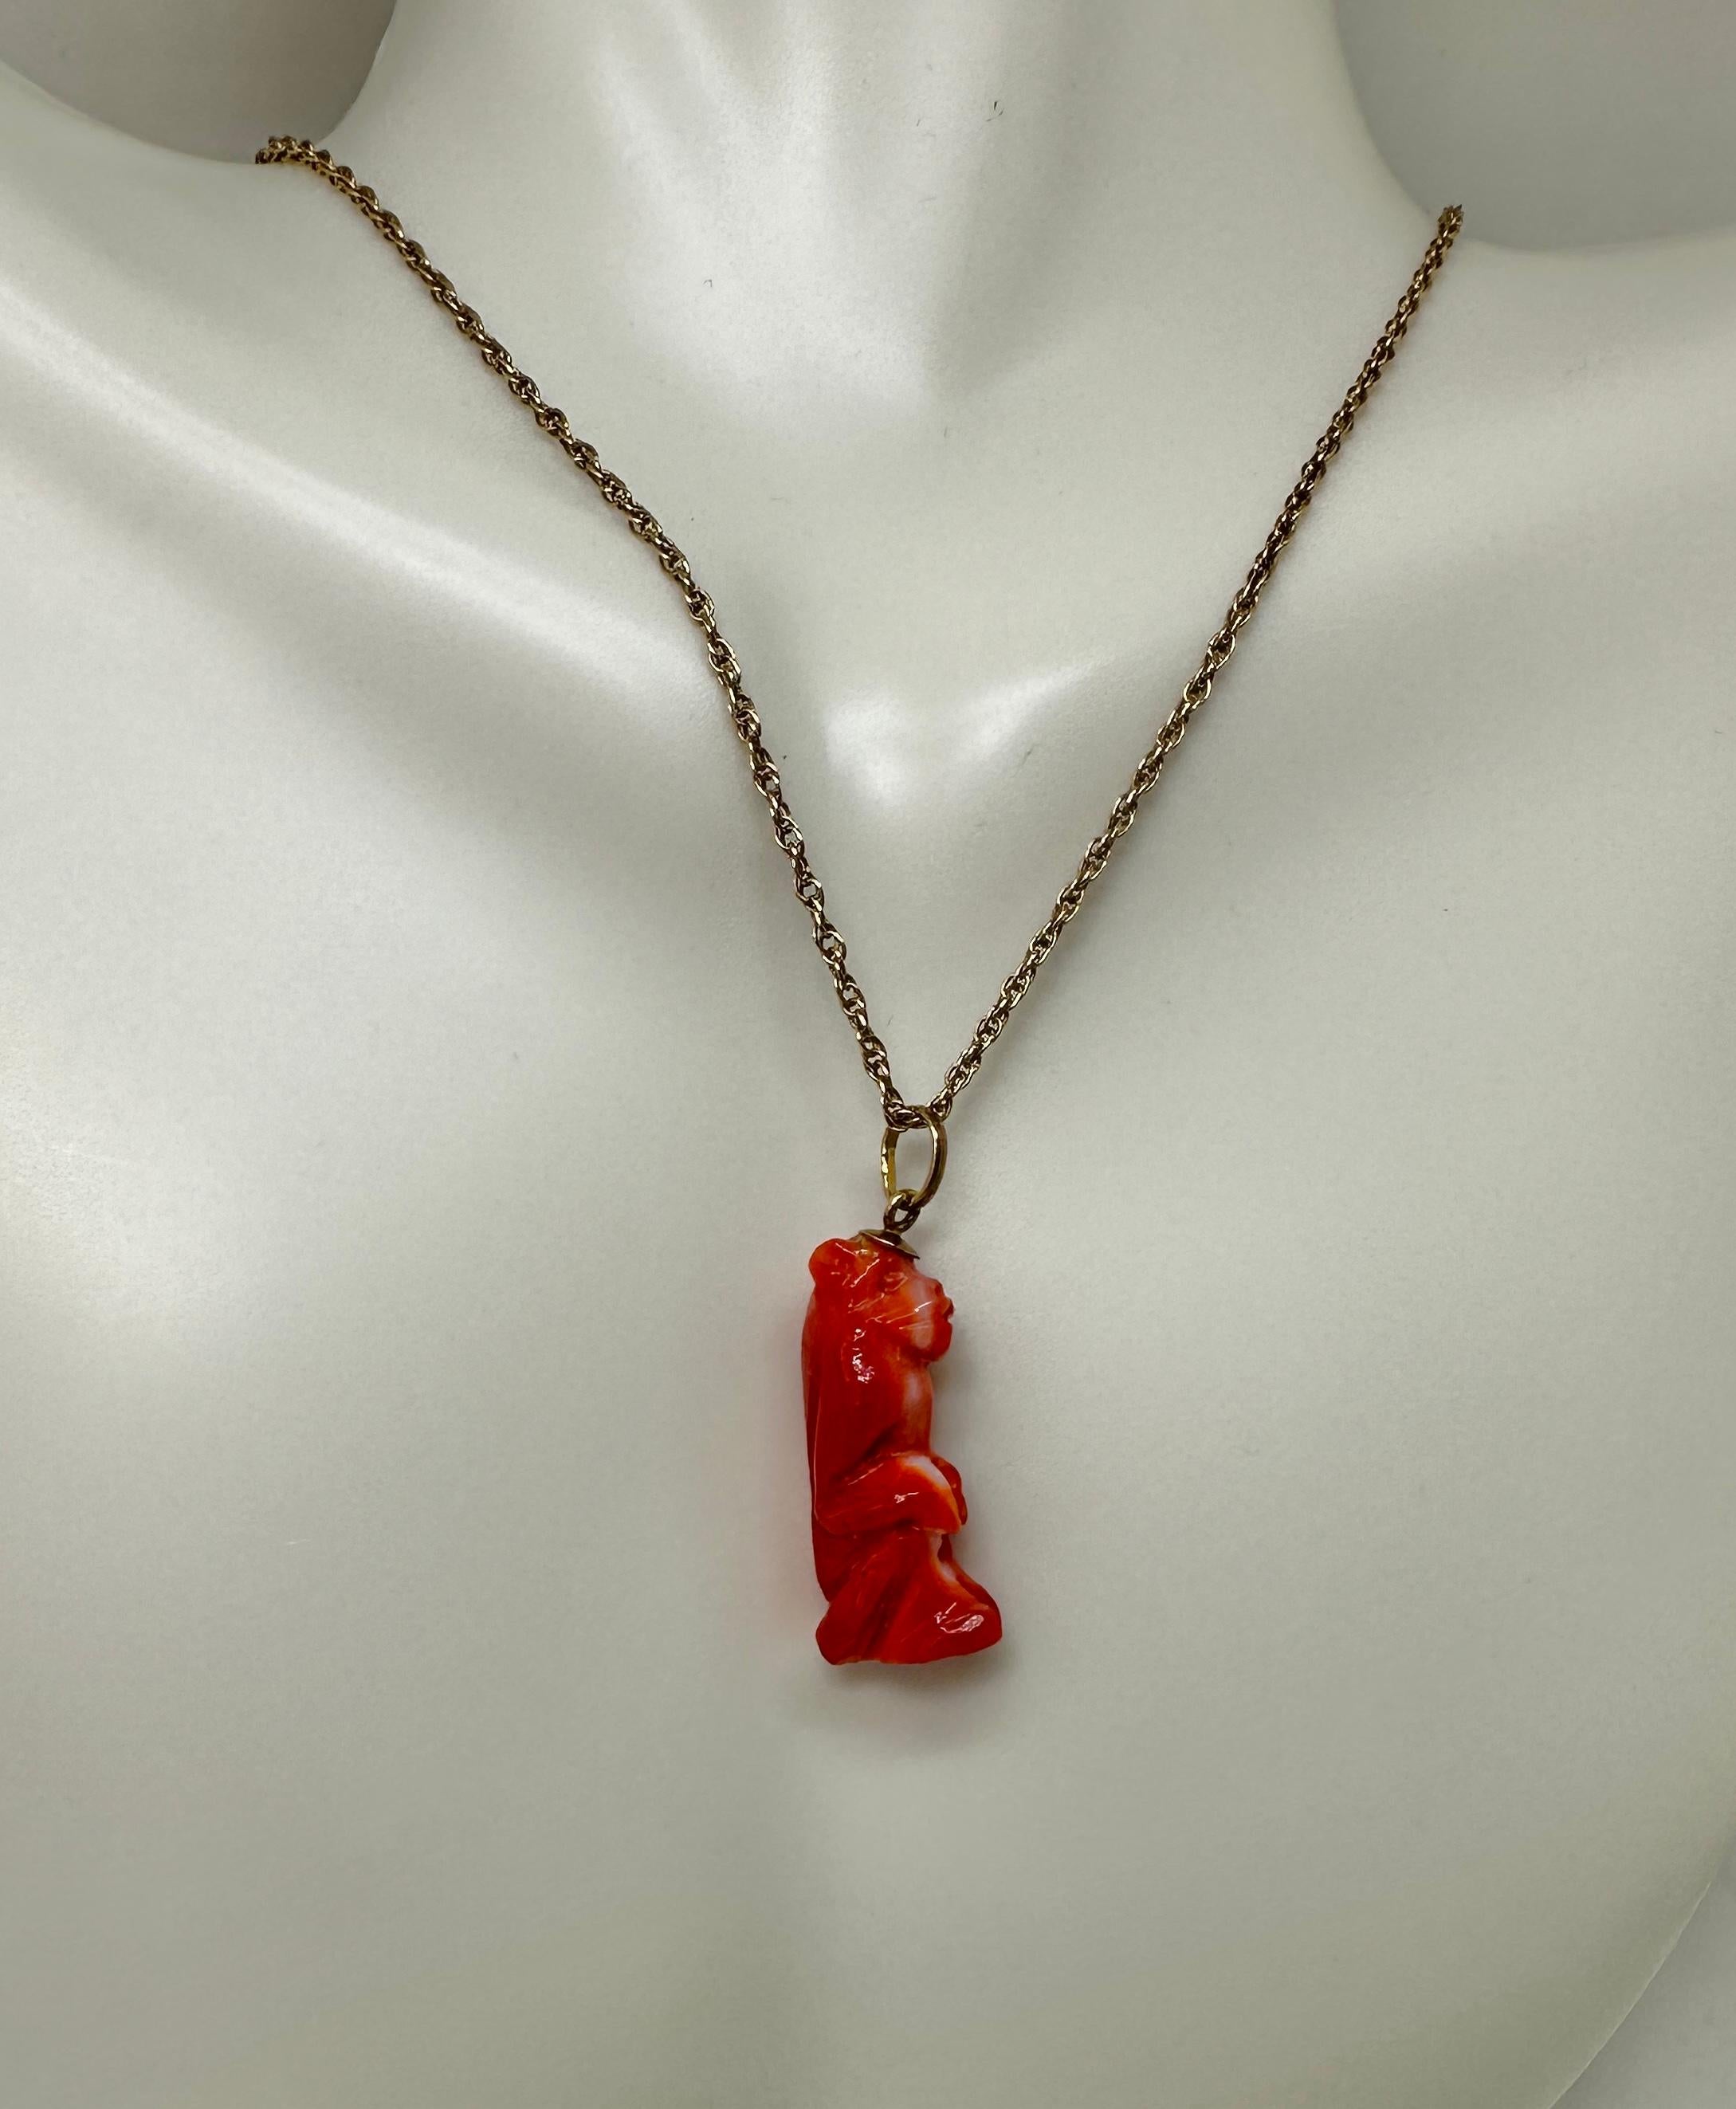 This is a stunning antique Art Deco Pendant or Charm of a Monkey in gorgeous hand carved natural Coral and set in 18 Karat Yellow Gold.  The coral monkey pendant is a masterpiece of artistic expression - the monkey is carved with exquisite detail